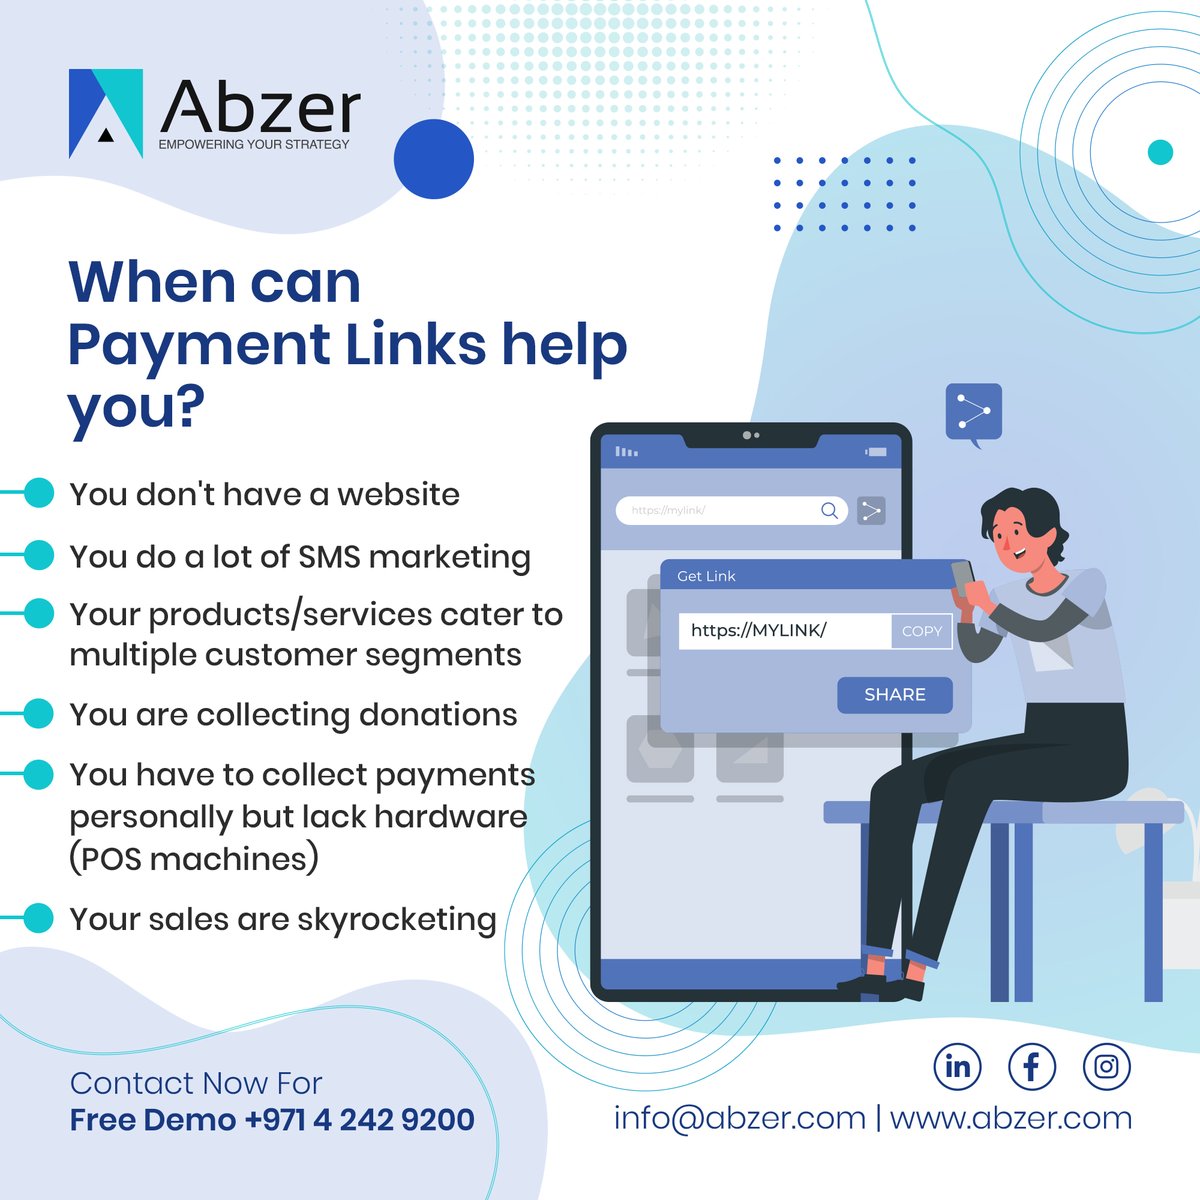 Getting paid has never been simpler! 

Say goodbye to chasing invoices and hello to Abzer's Easy to use Payment Links.

Are you prepared to simplify your payment process? 
Visit abzer.com/payment-links/ to find out more! 

#PaymentLinks  #AbzerDMCC    #GetPaidFaster